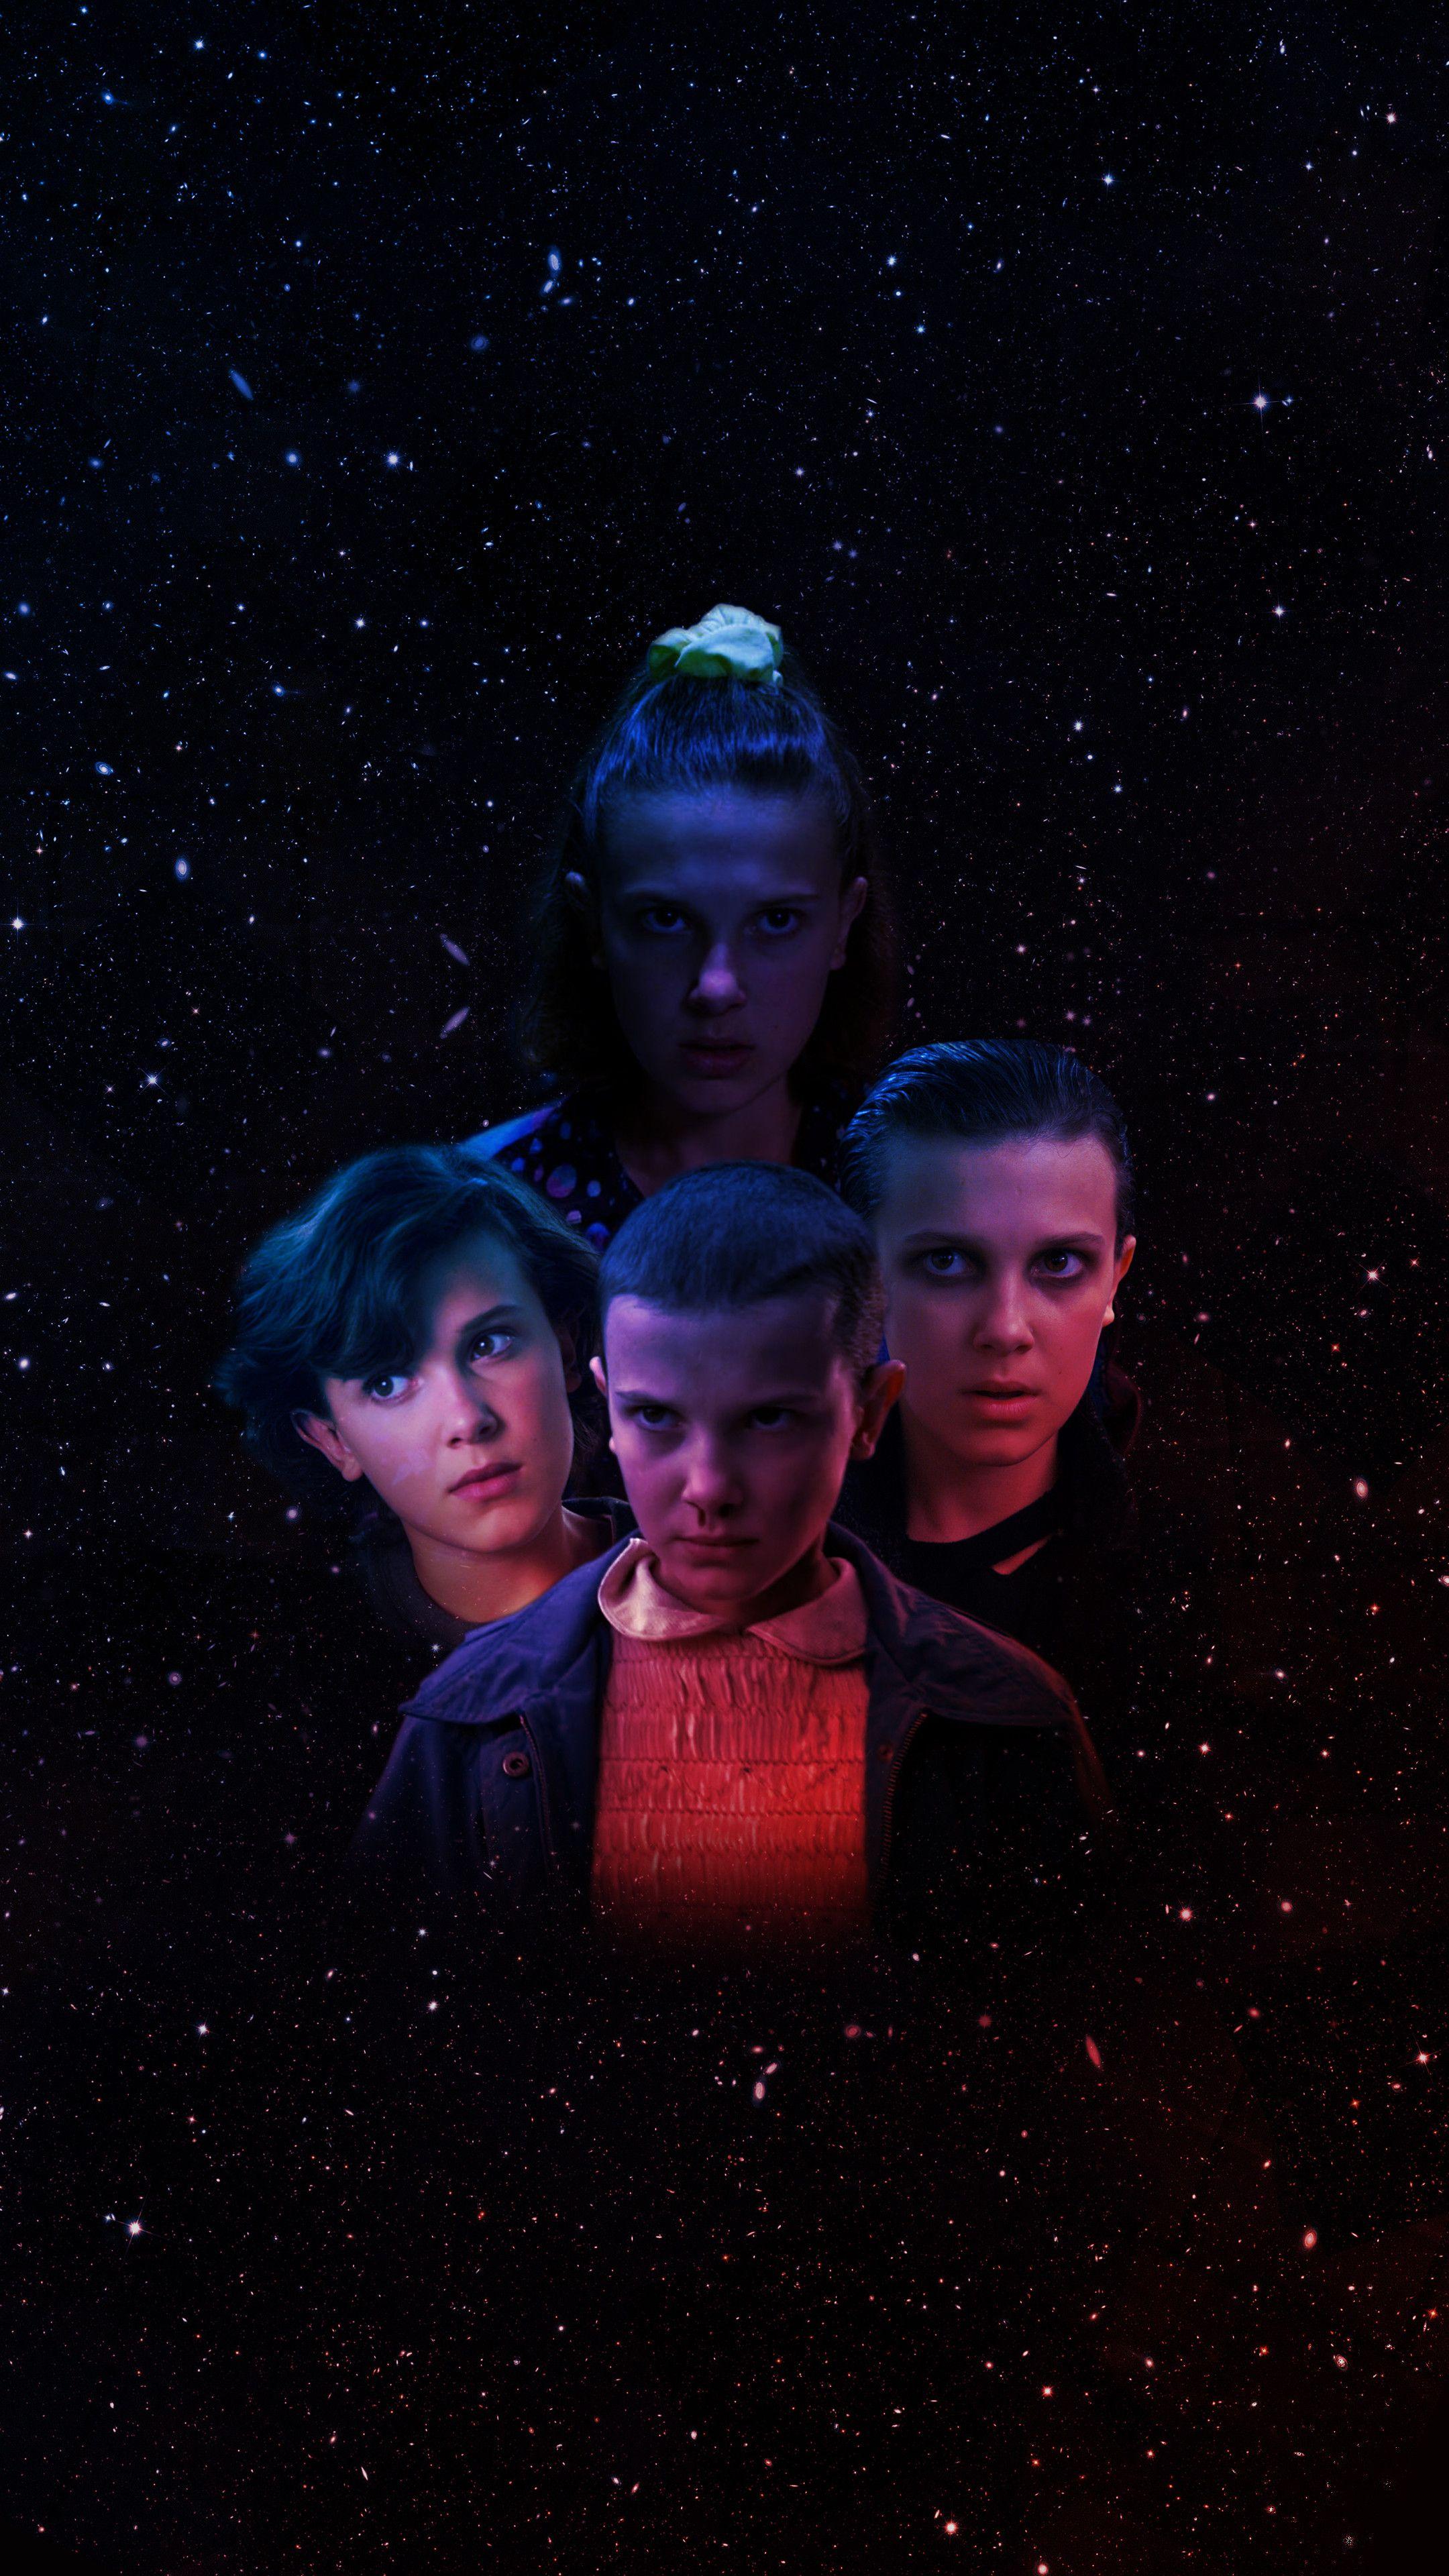 60 Eleven Stranger Things HD Wallpapers and Backgrounds